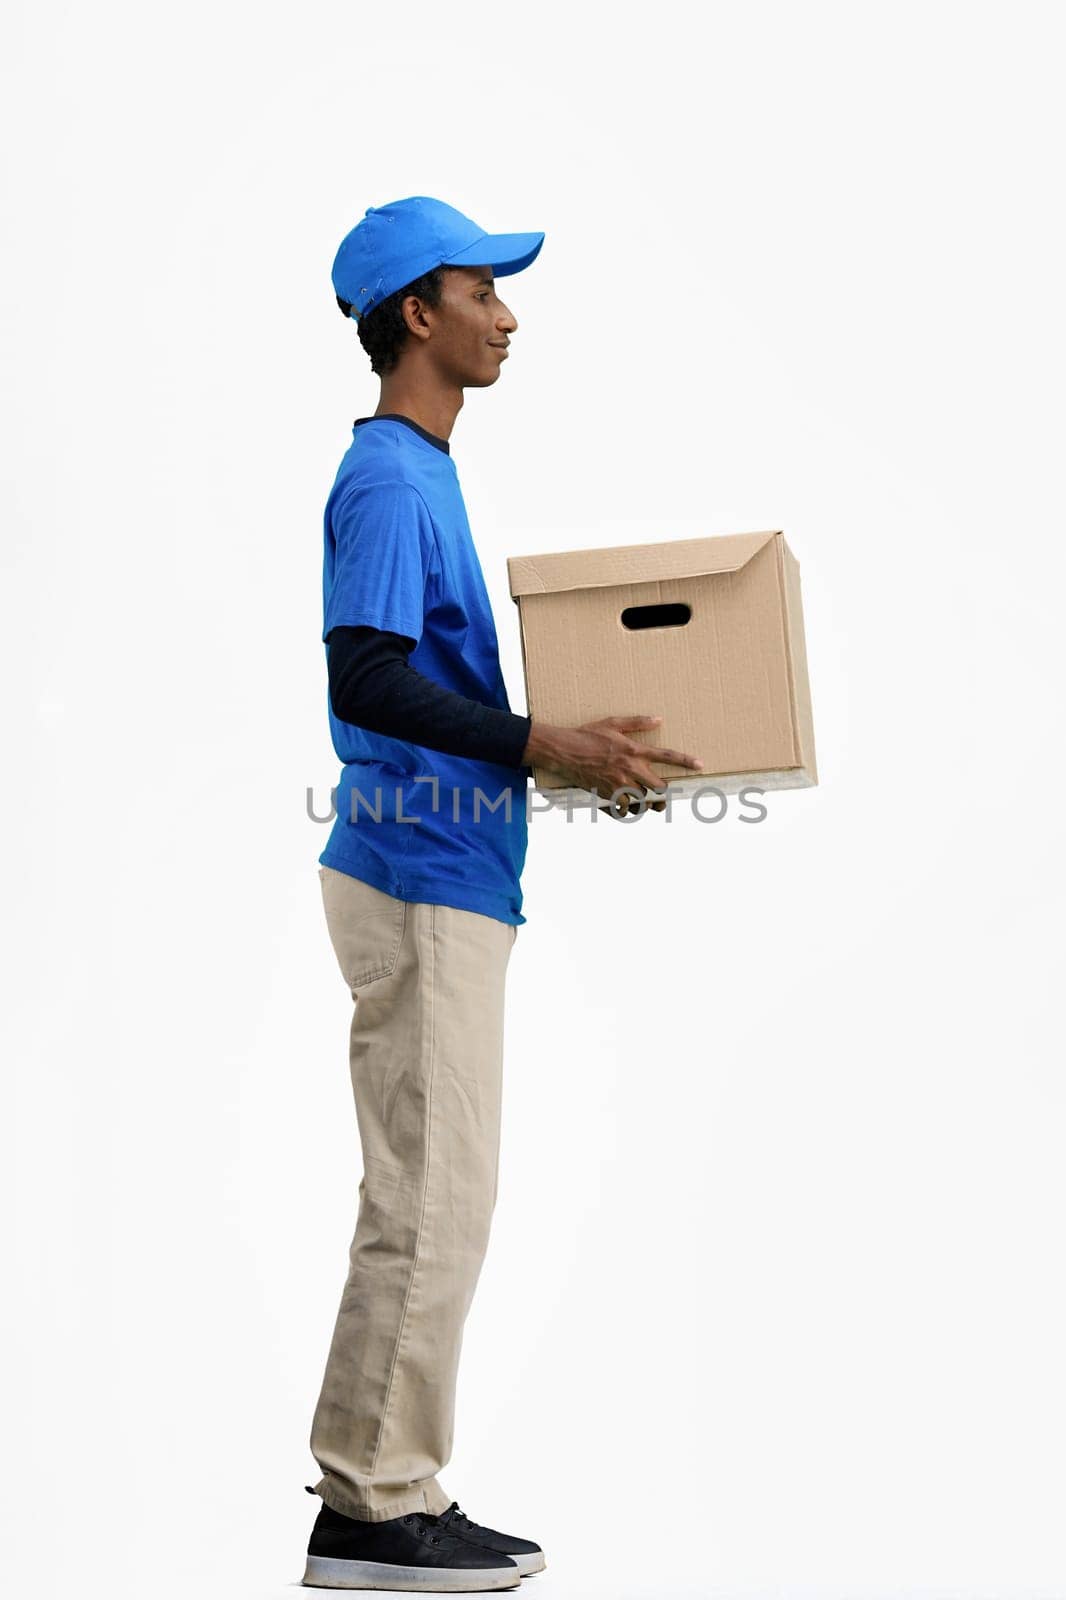 The deliveryman, full-length, on a white background, with a box.